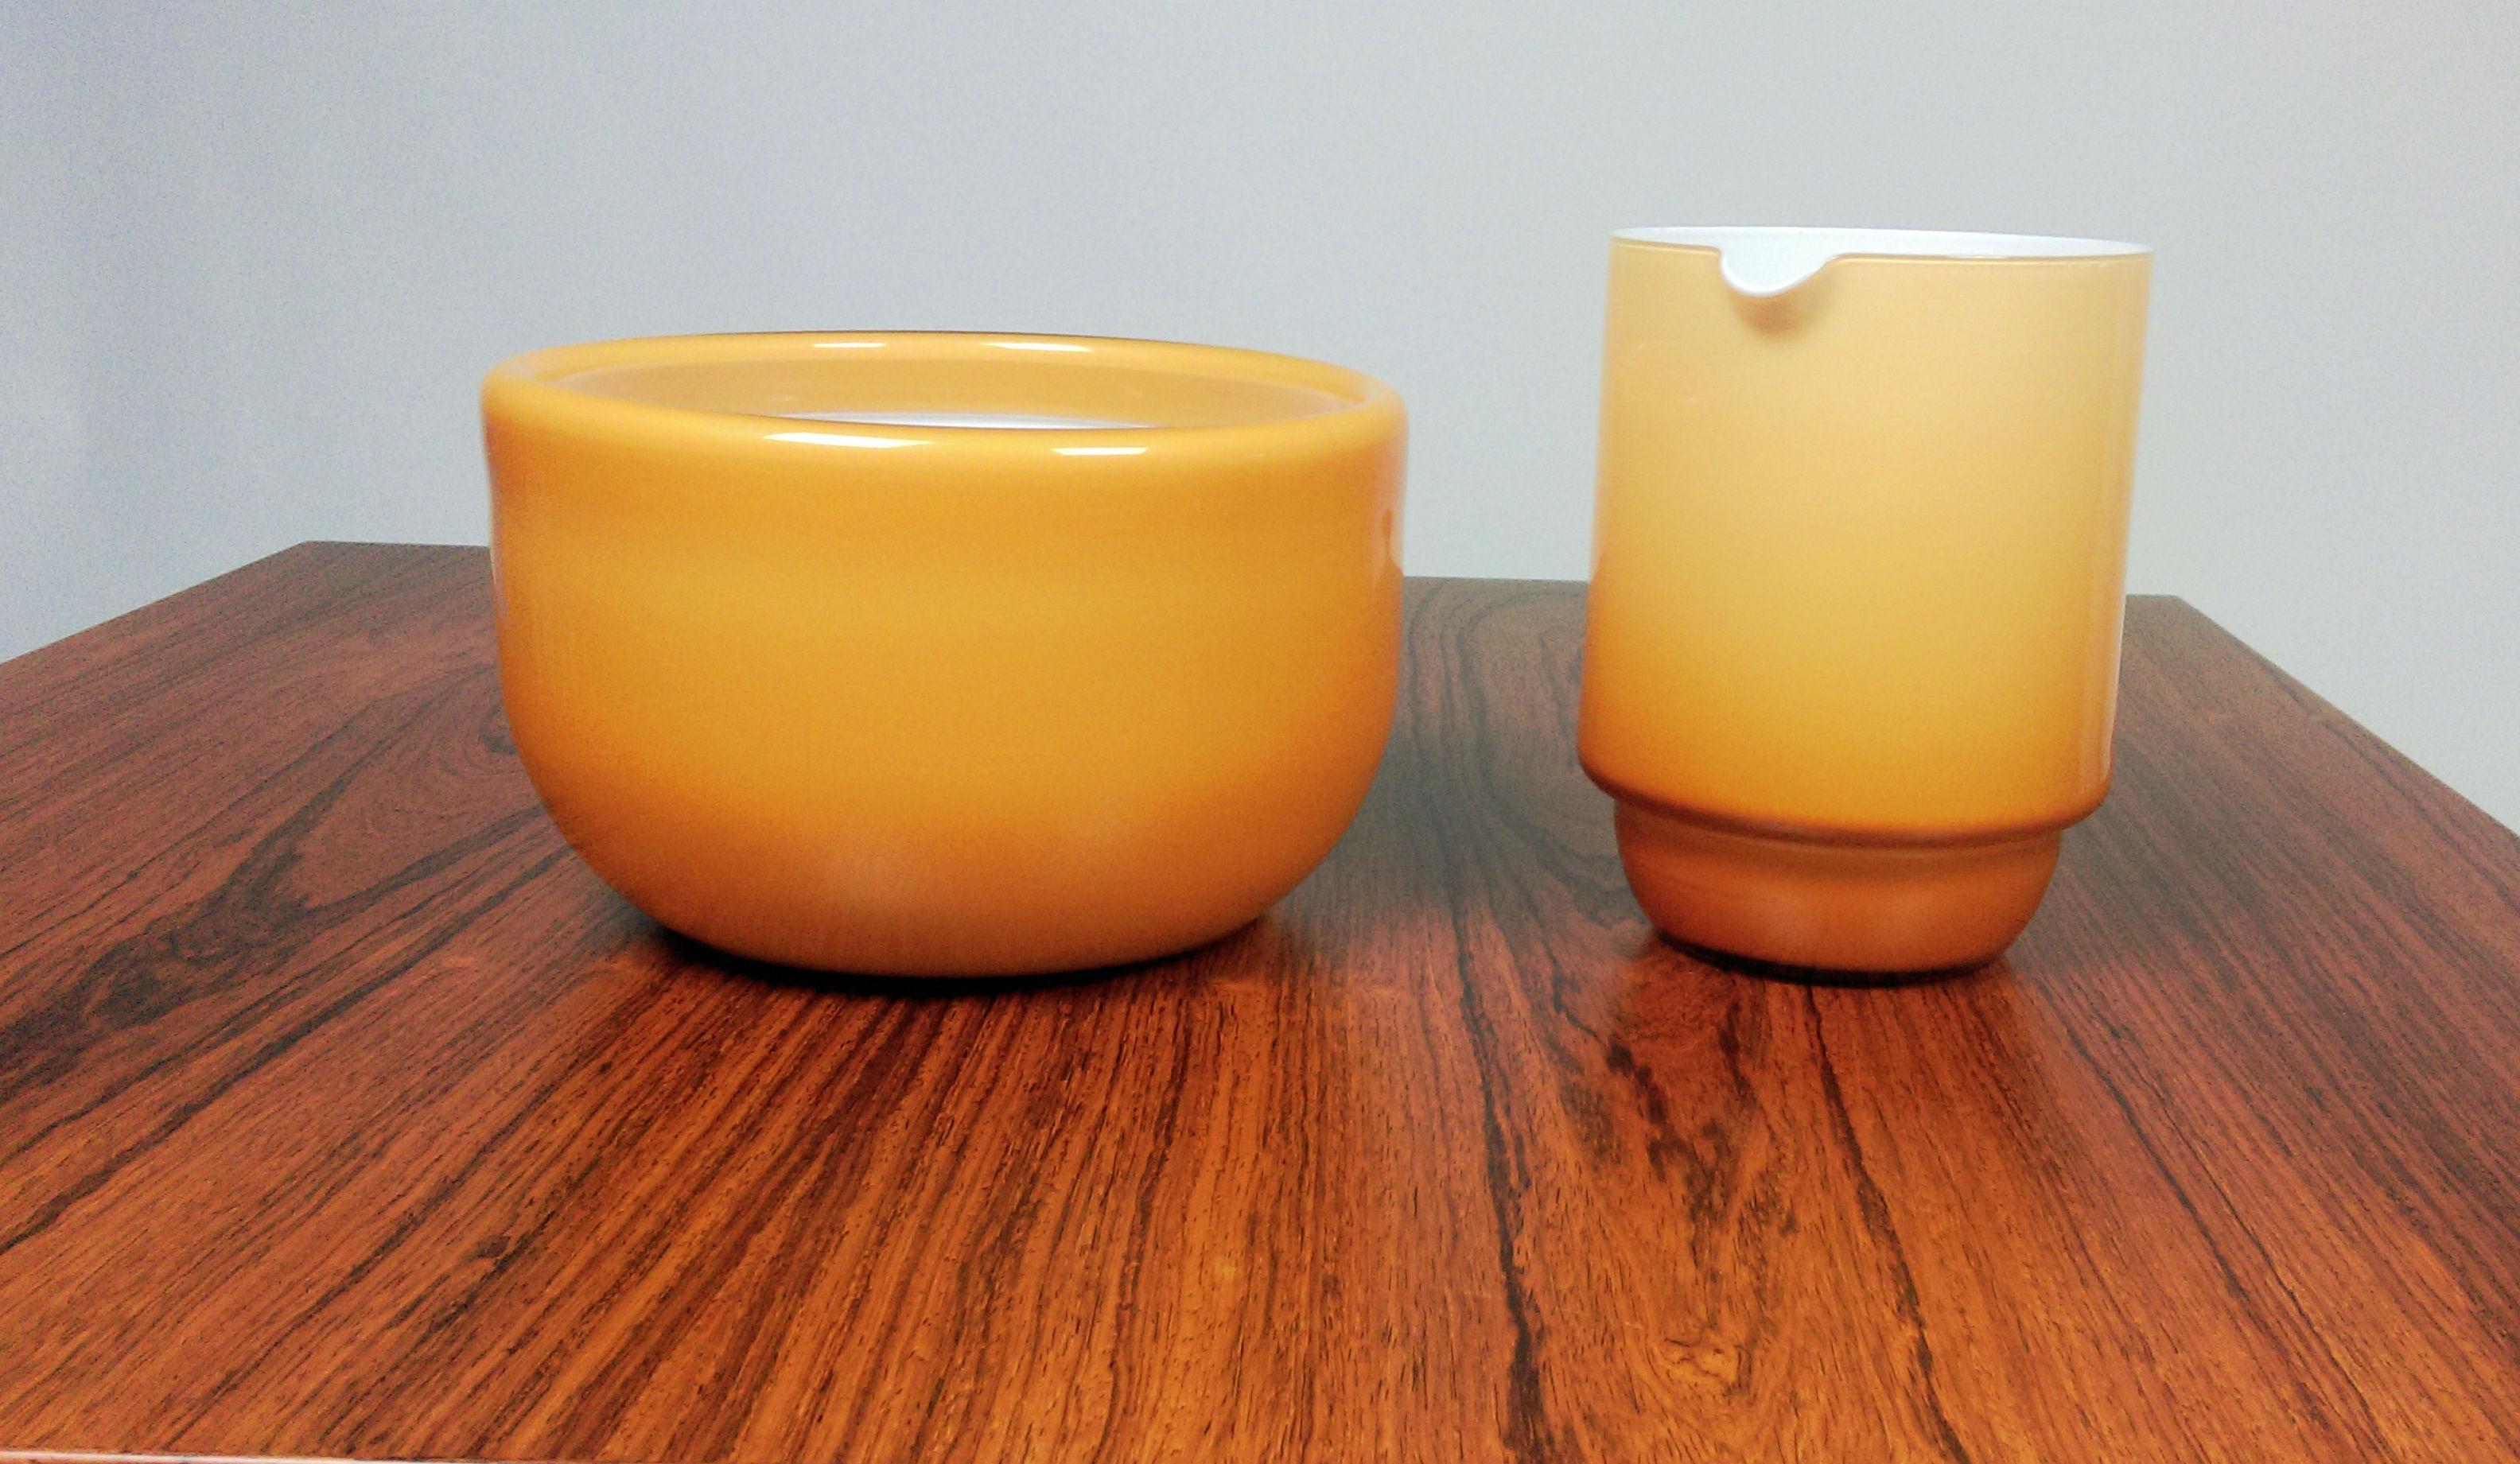 Set of pitcher and bowl in yellow glass designed by Michael Bang and produced by Holmegaard in the 1970s.

The set is in excellent condition.

Seize in cm. / in.:
Bowl
H: 11.5 / 4,5., D: 19 / 7.5
Pitcher
H: 15 / 5.9, D: 11 / 4.3
 